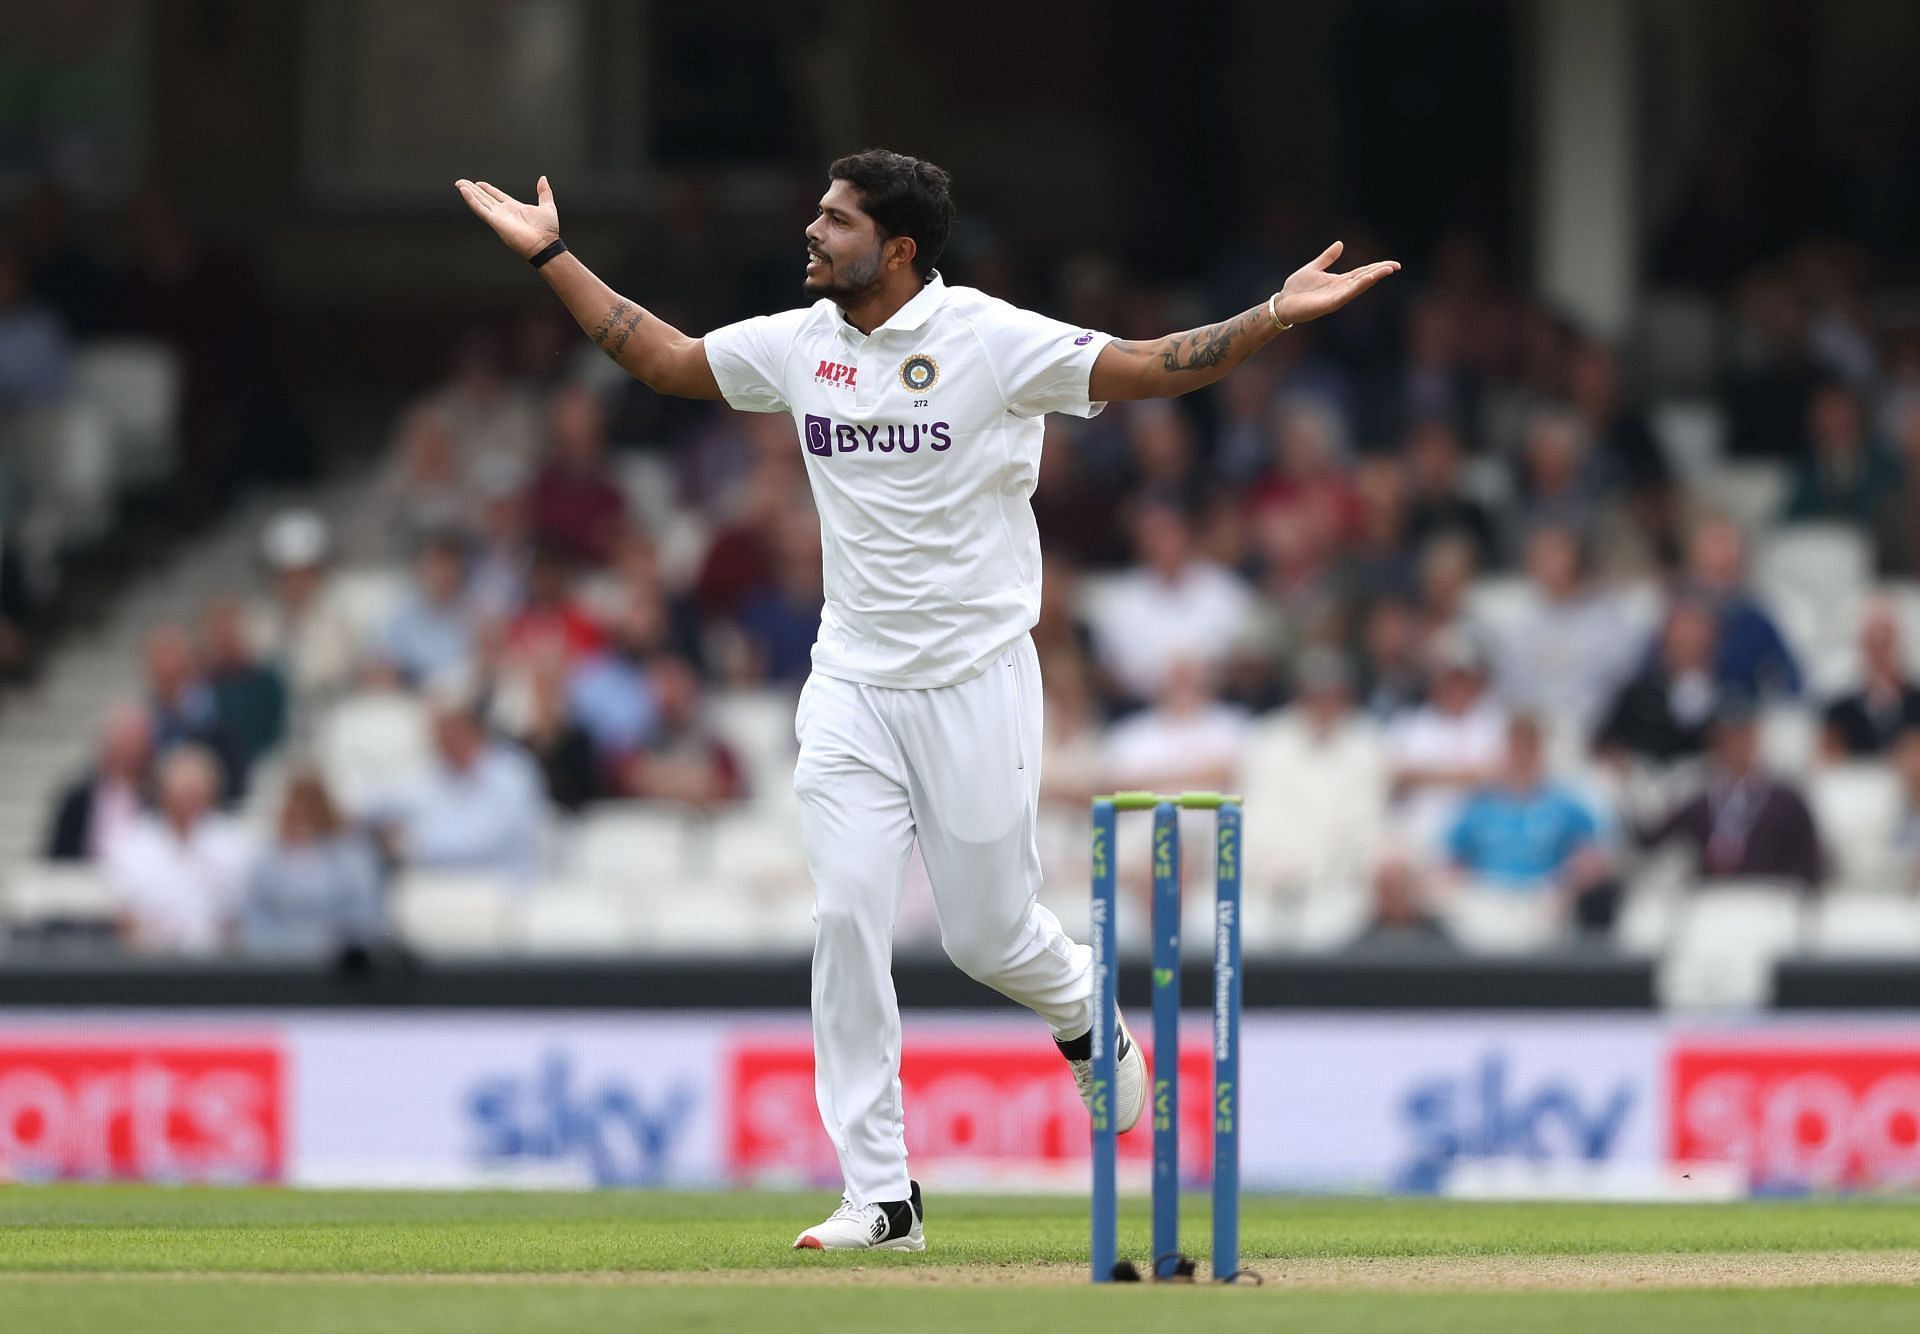 Umesh Yadav will still find takers in the IPL 2022 auction